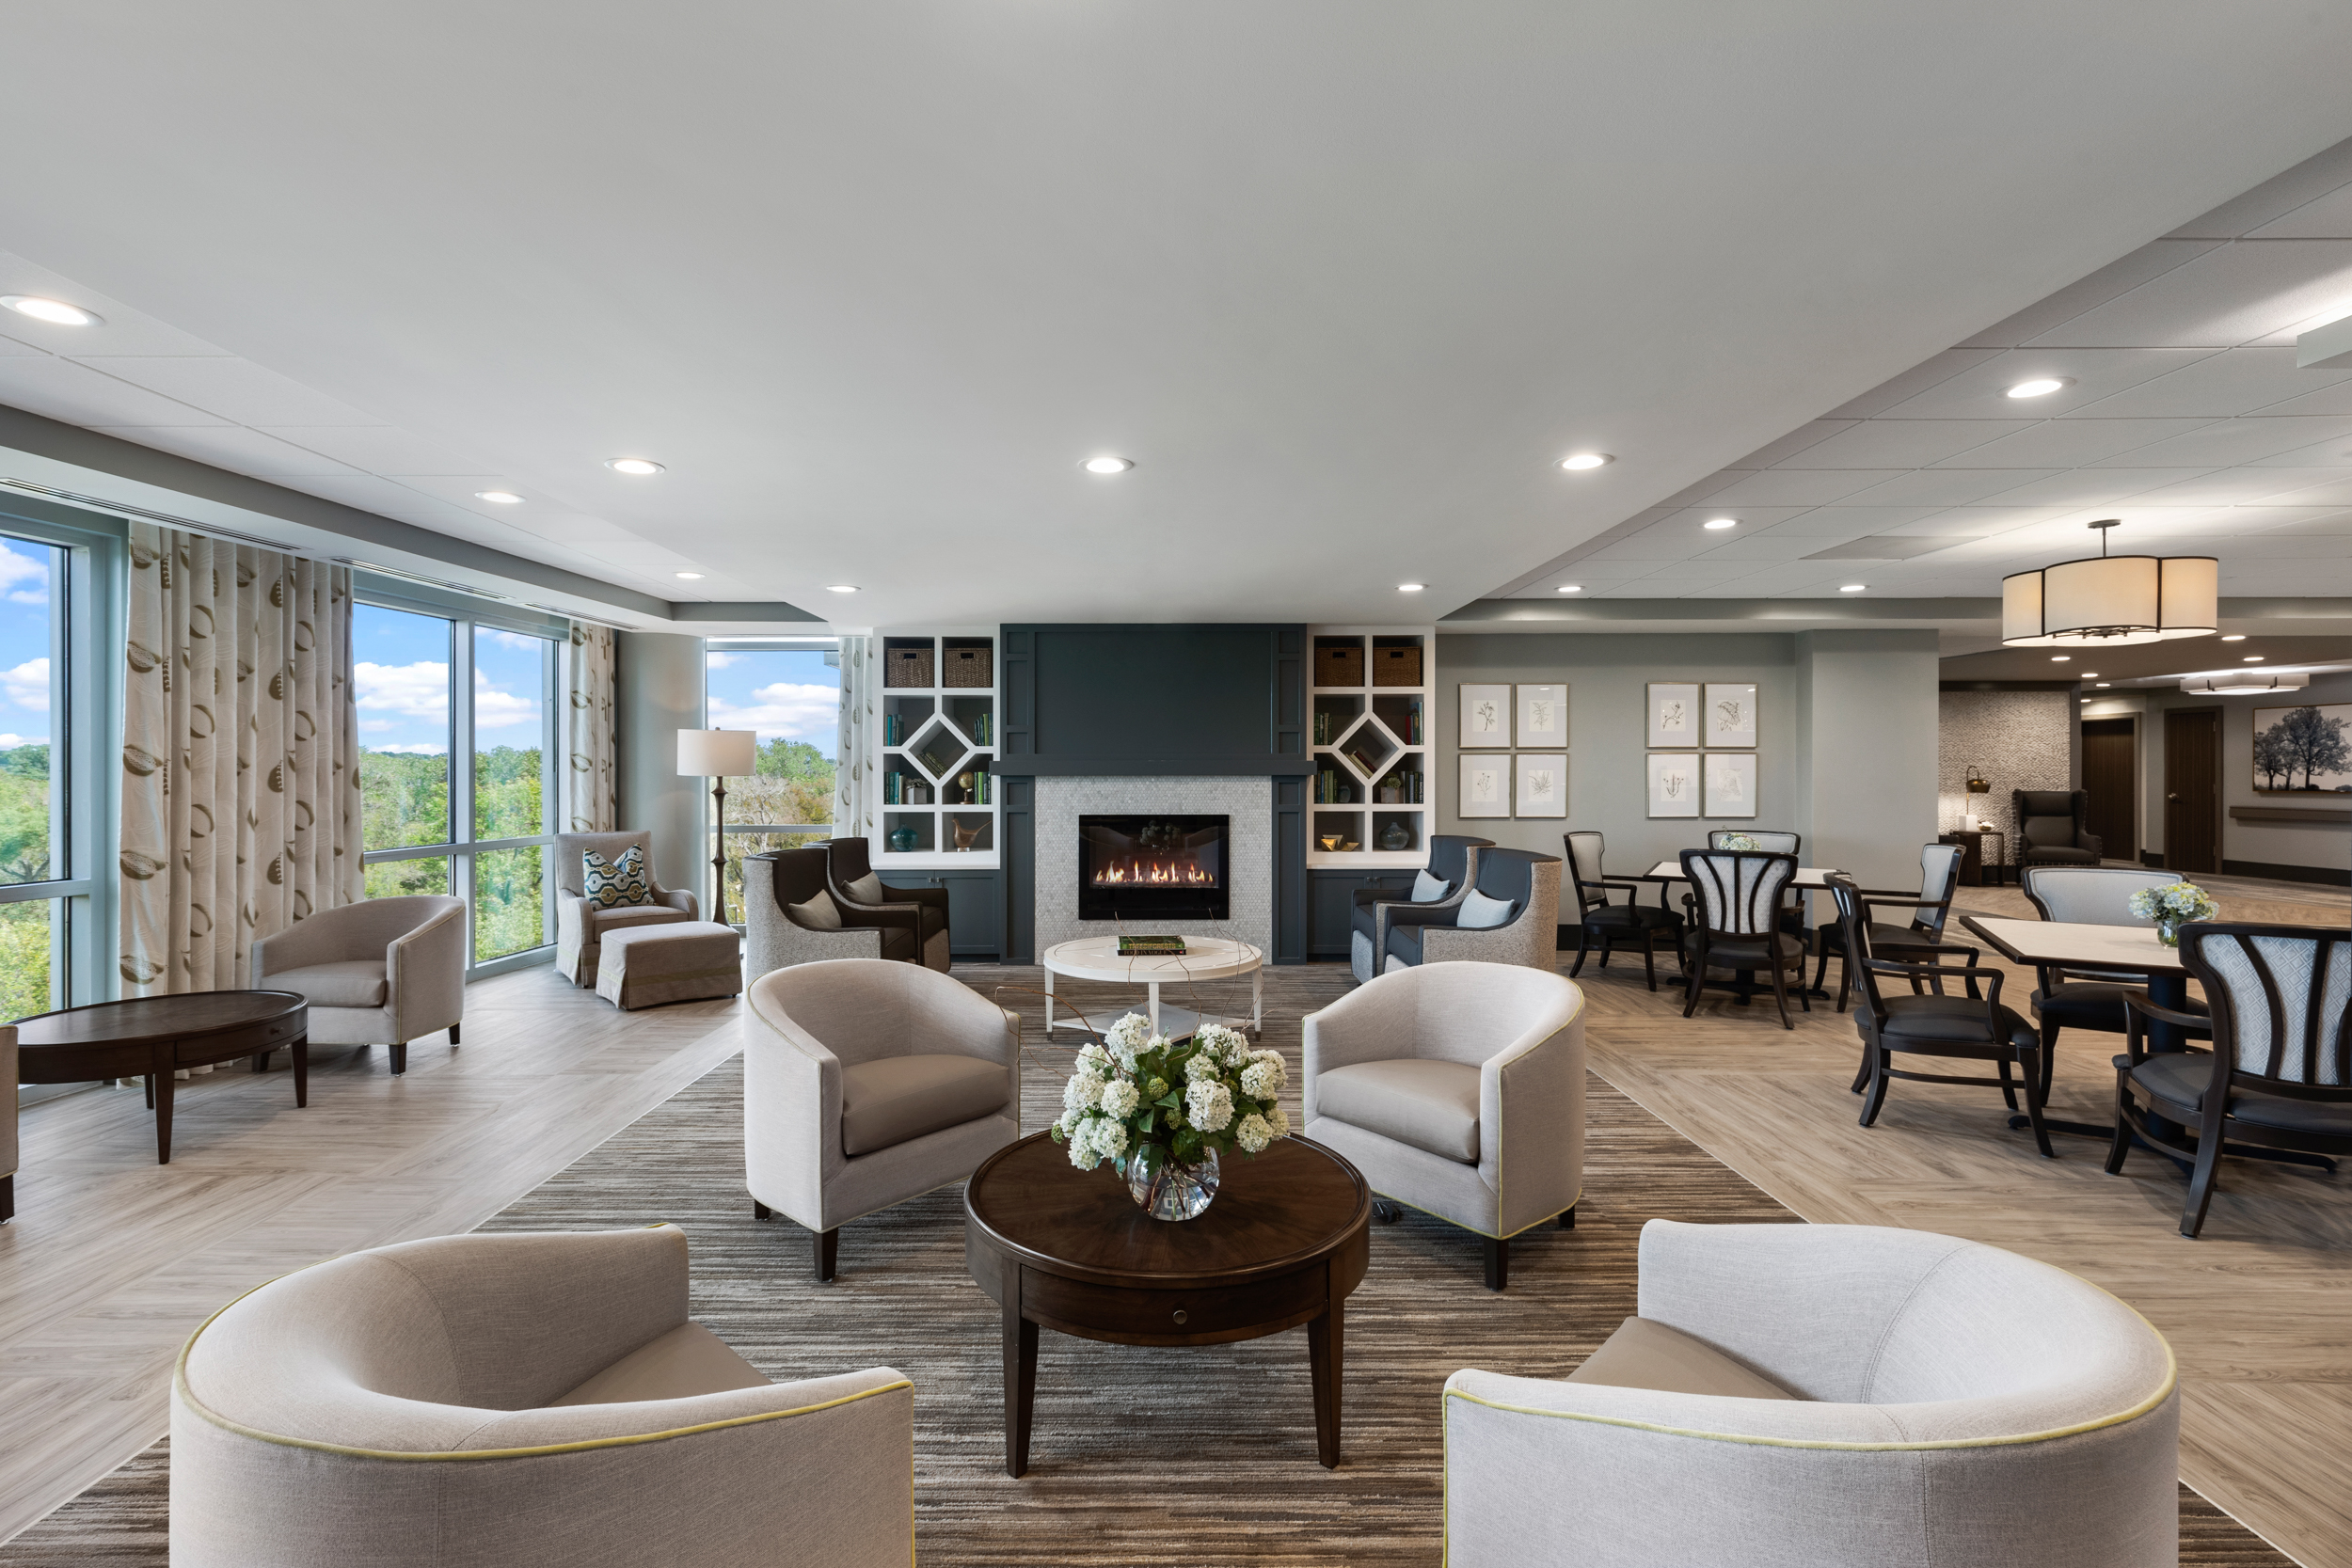 4th floor inside the vista featuring a fireplace, chairs and tables